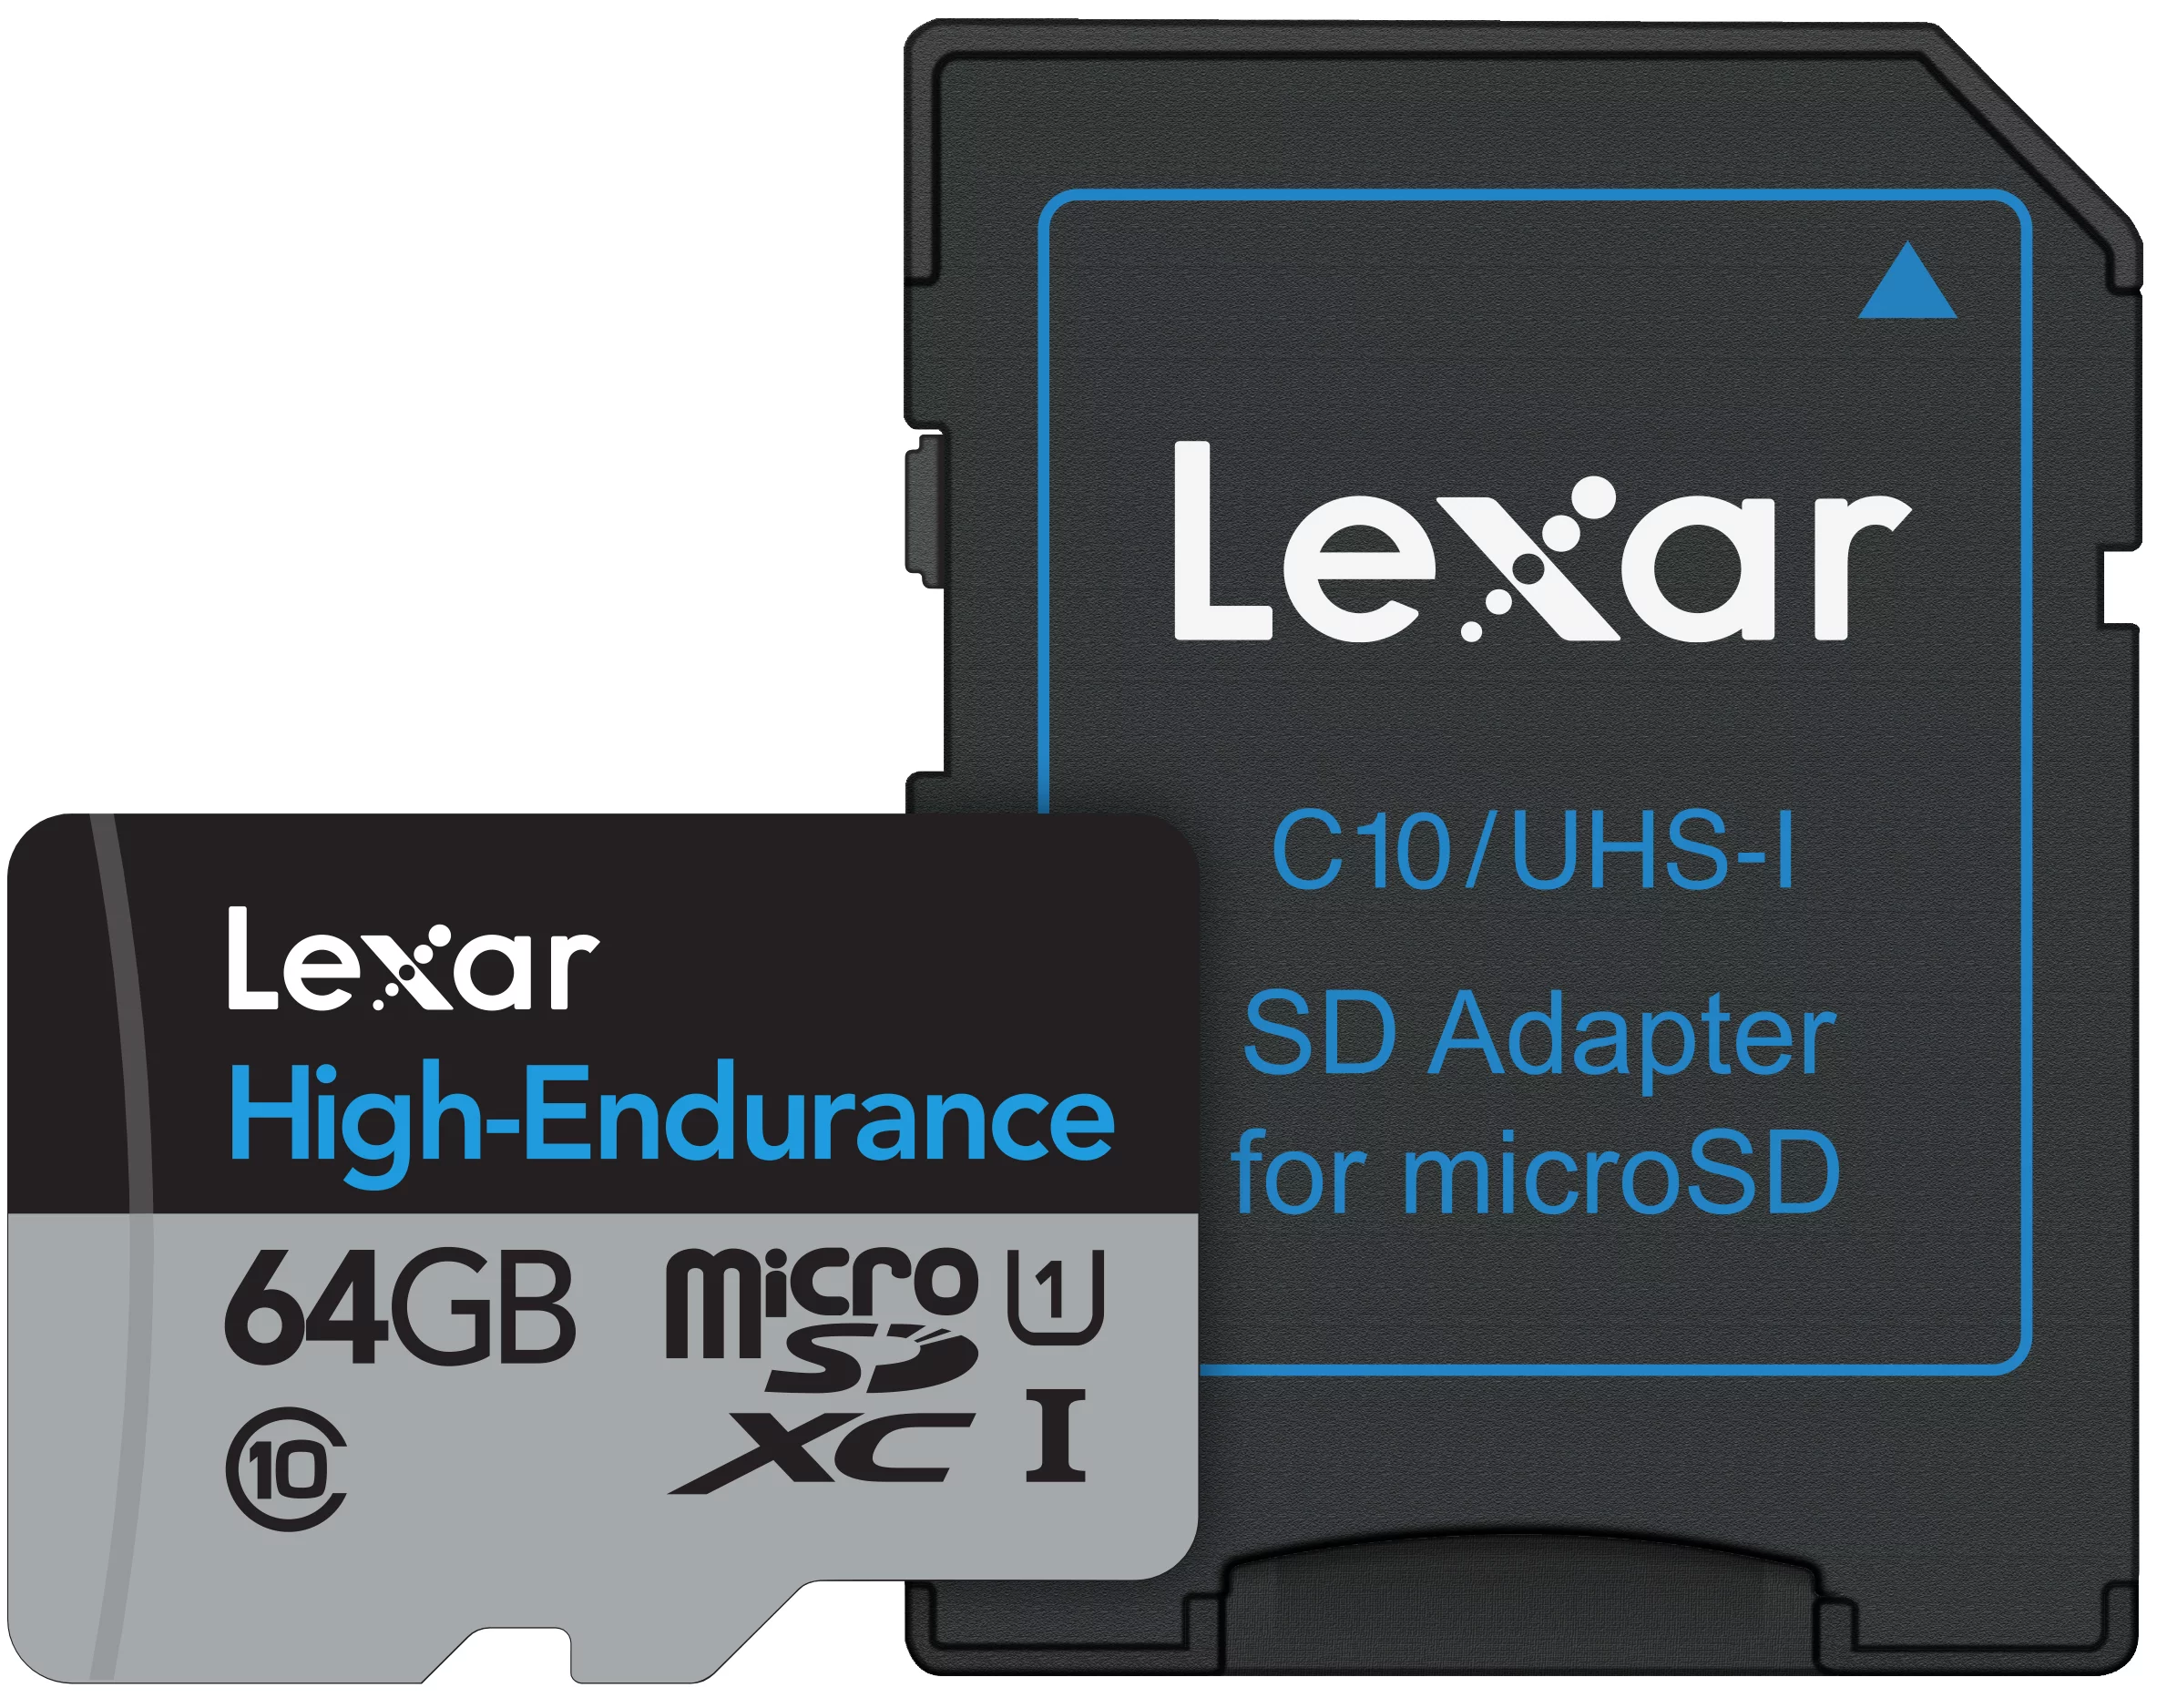 lexar he microsd 64gb ada image - for some reason we don't have an alt tag here